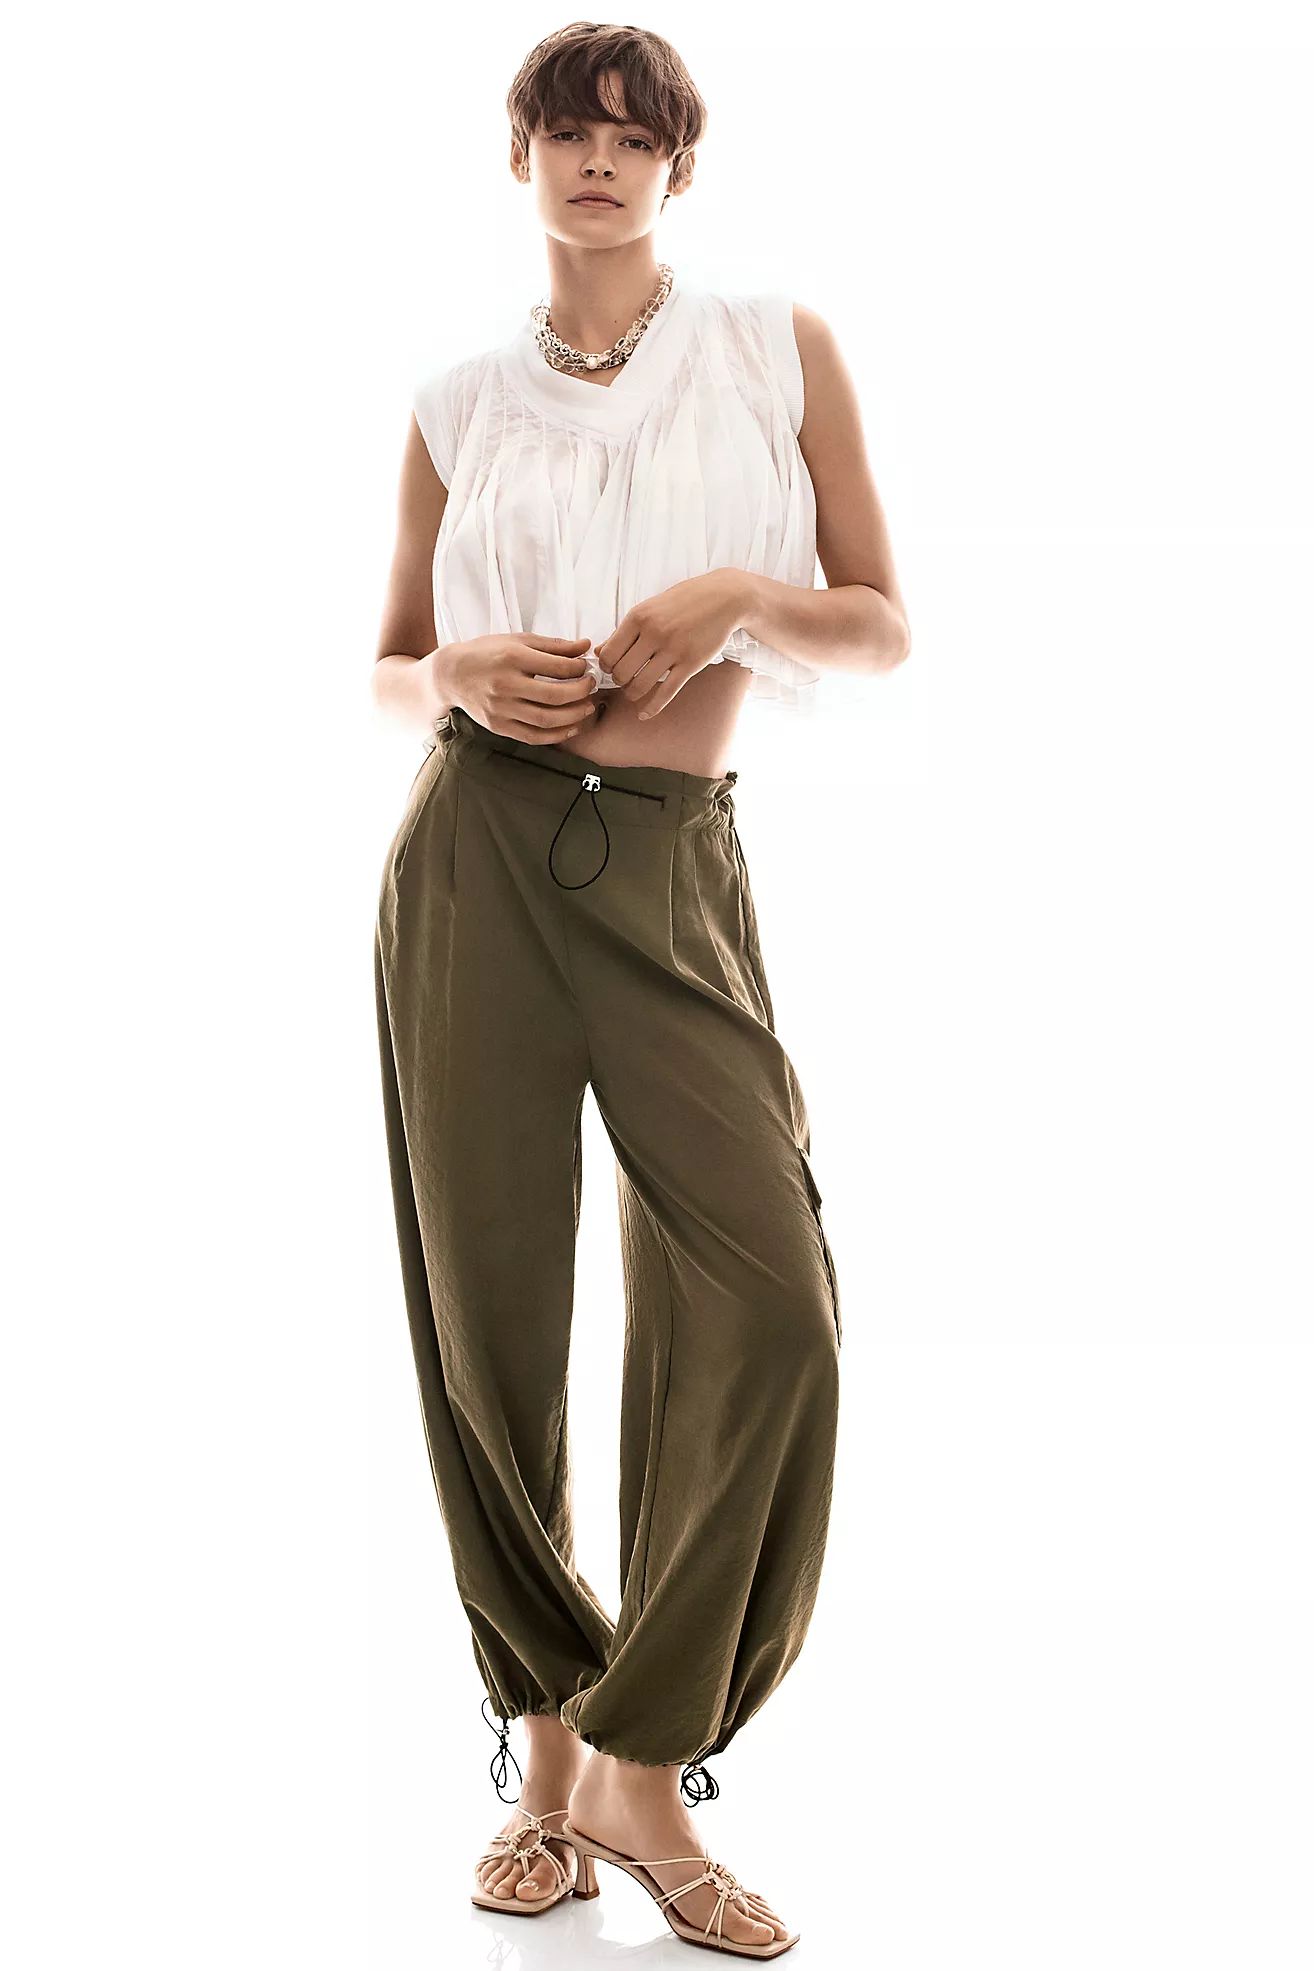 By Anthropologie Bungee Parachute Pants | Anthropologie (US)